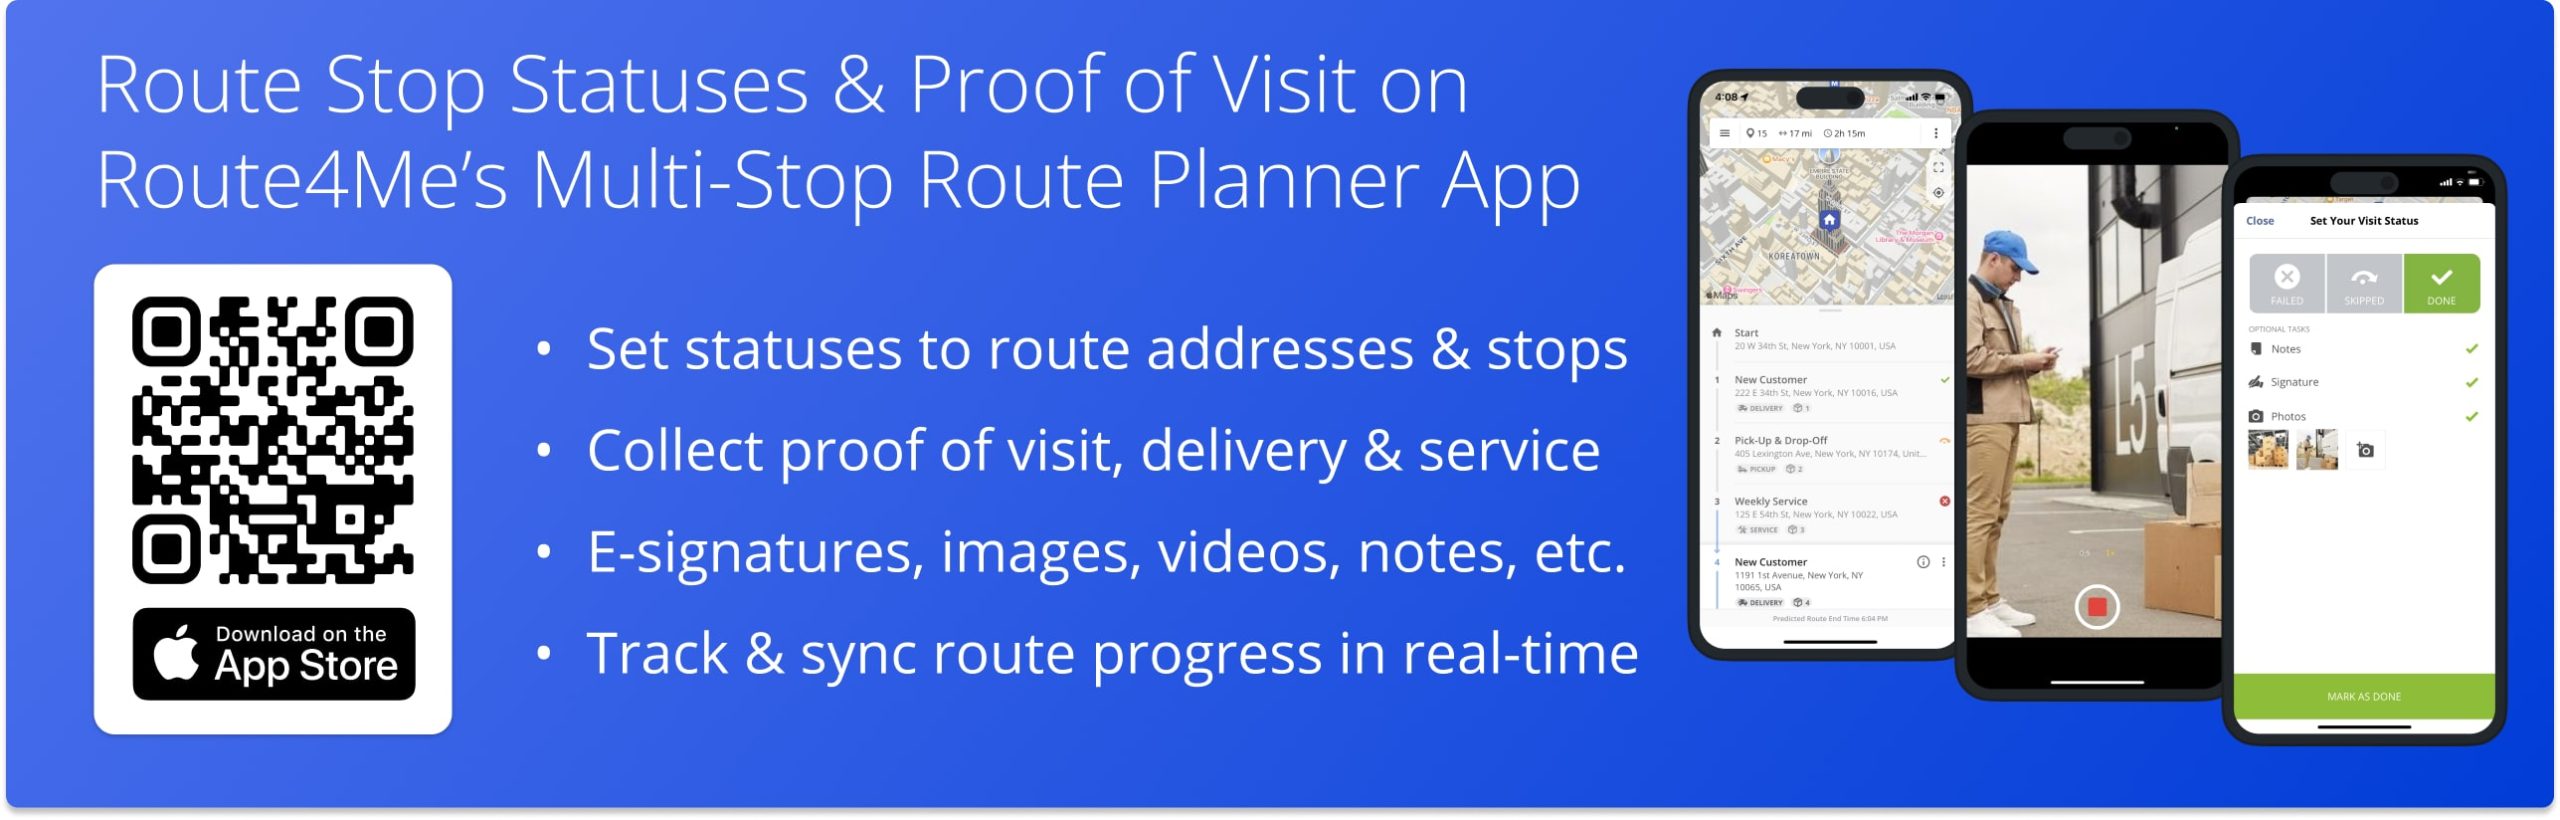 Set route stop statuses and attach electronic proof of visit, delivery, or service to route stops on Route4Me's Android route planner app.